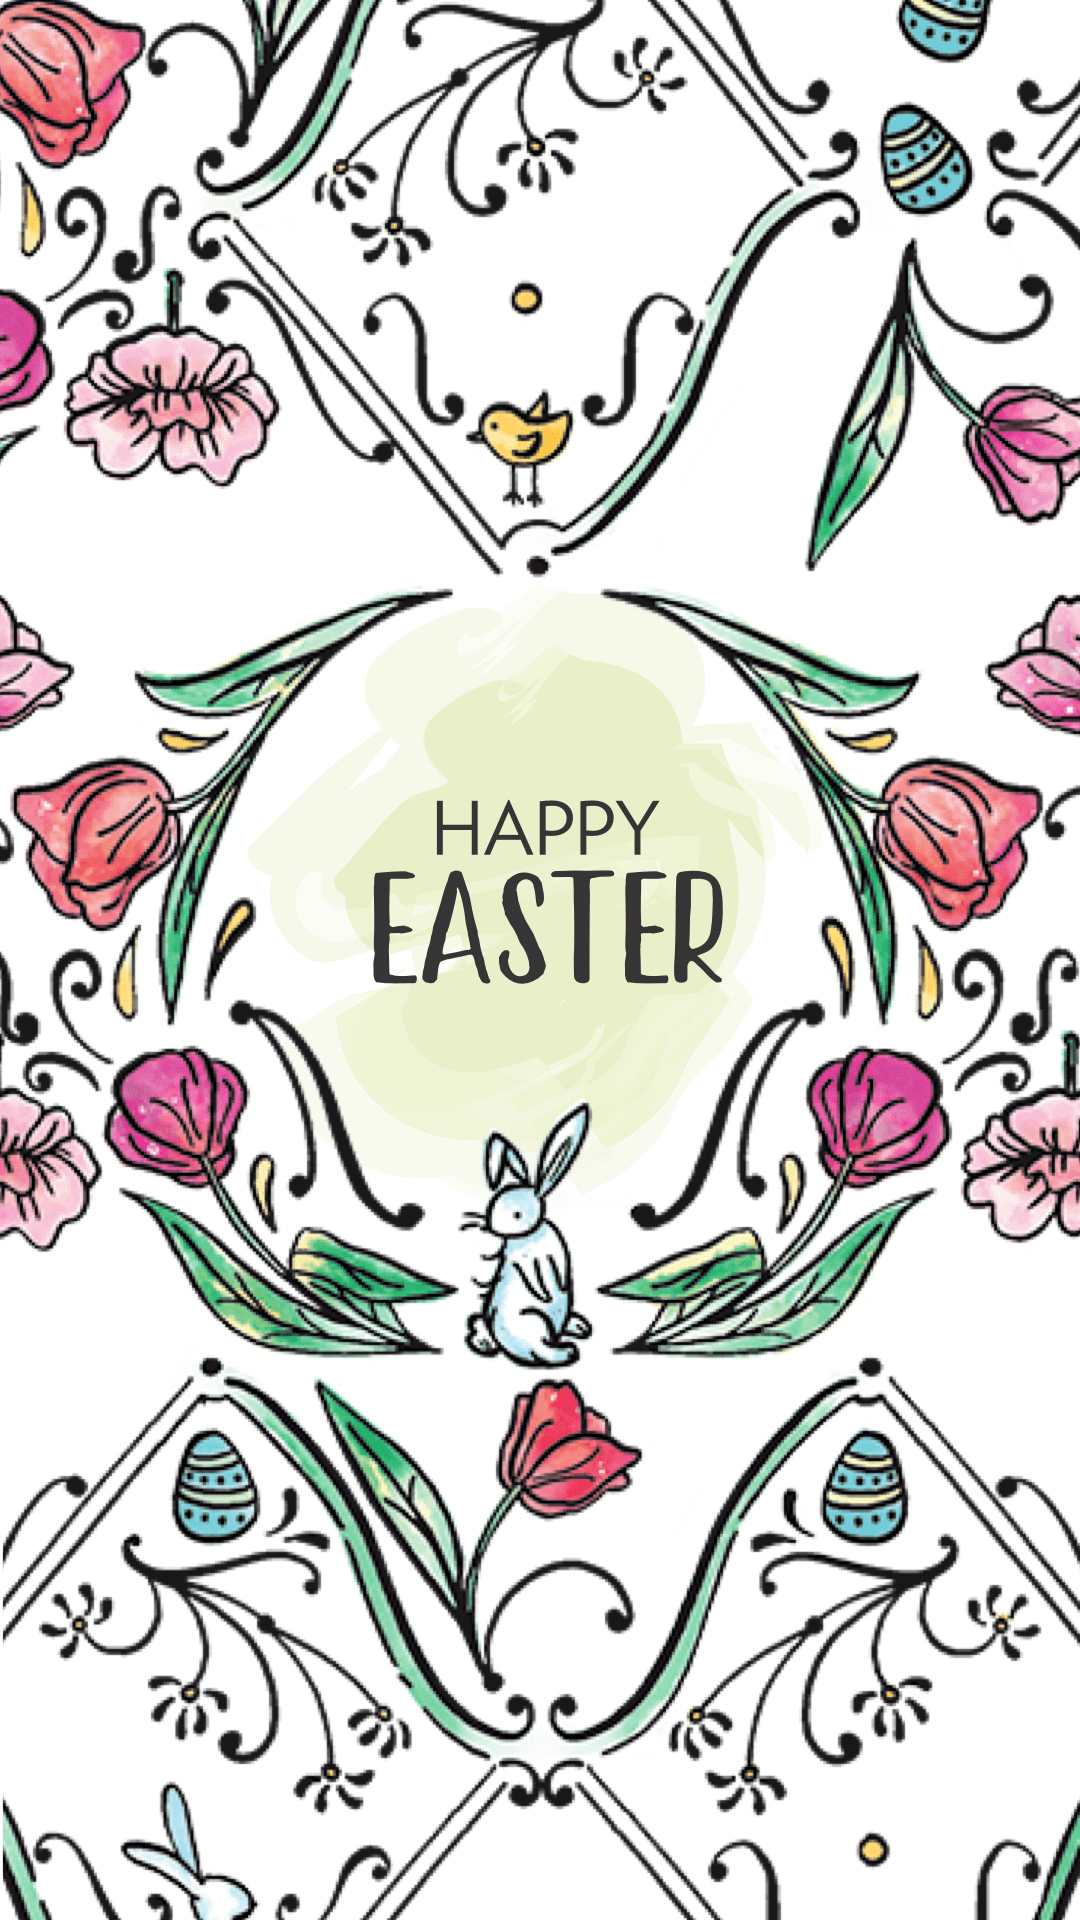 Download Celebrate Easter in Style with an Easter Phone Wallpaper   Wallpaperscom